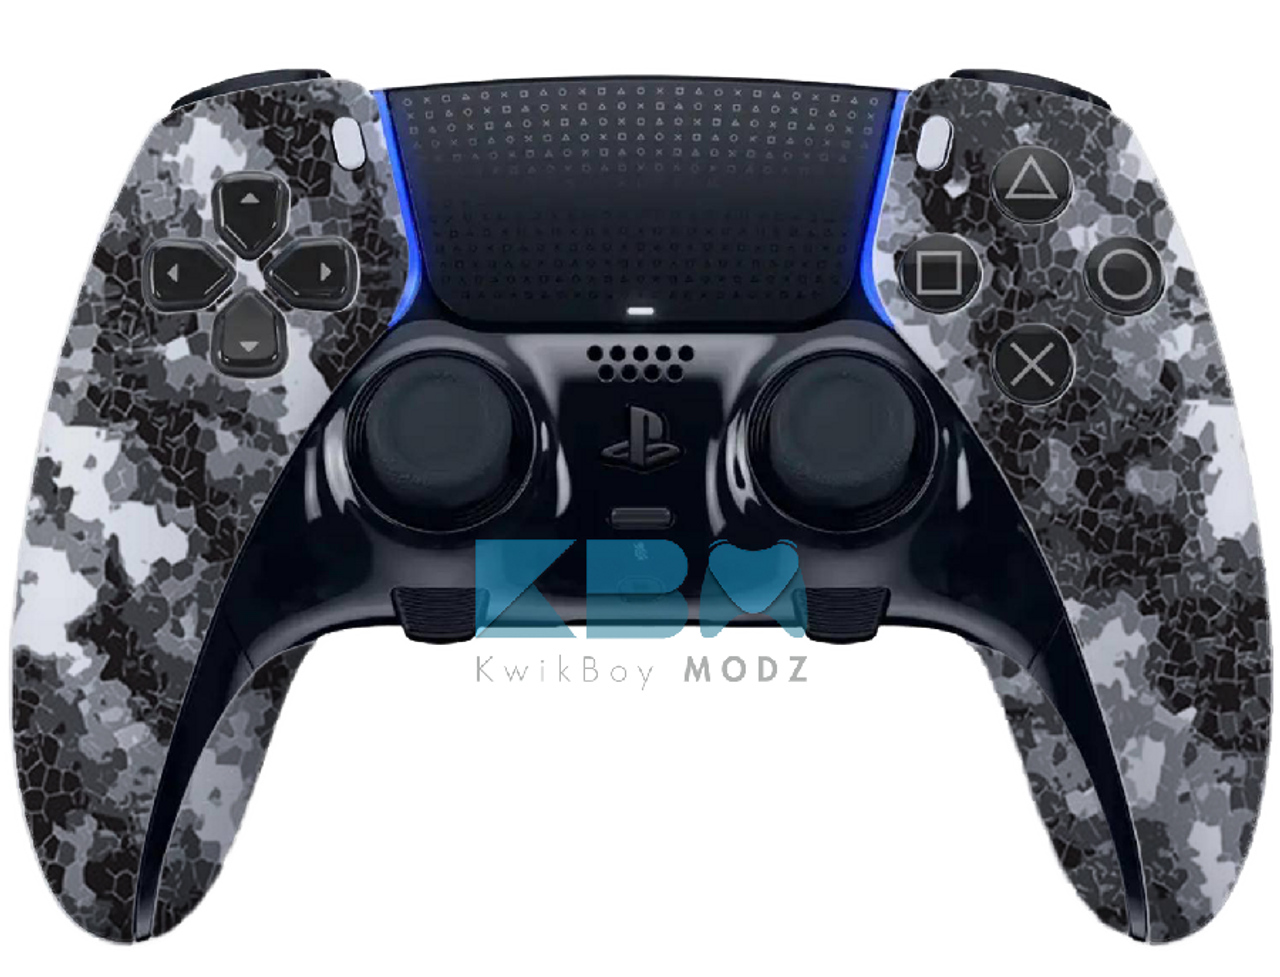 https://cdn11.bigcommerce.com/s-4p4ijswx/images/stencil/1280x1280/products/1319/4525/White-Defected-PS5-Pro-Controller__54014.1666117964.png?c=2?imbypass=on